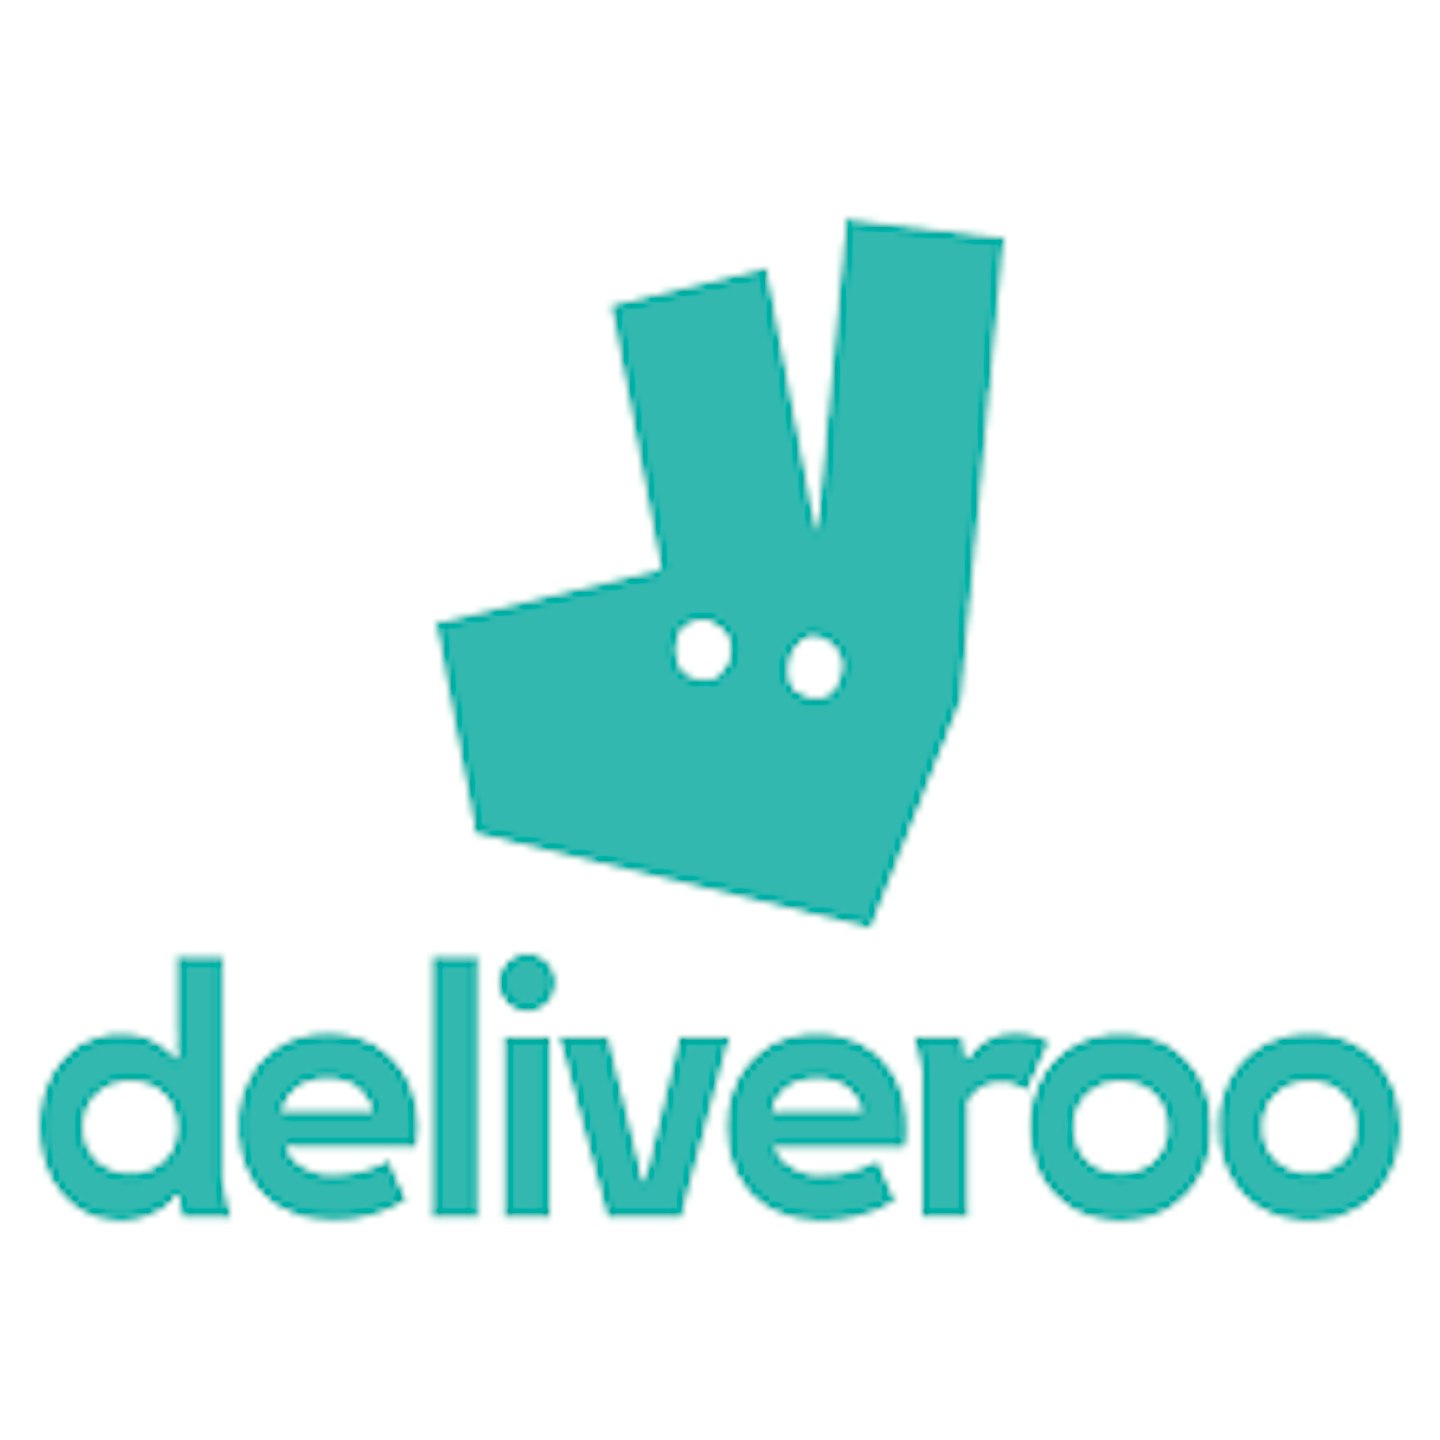 Deliveroo E-Gift Card - Baby shower gift